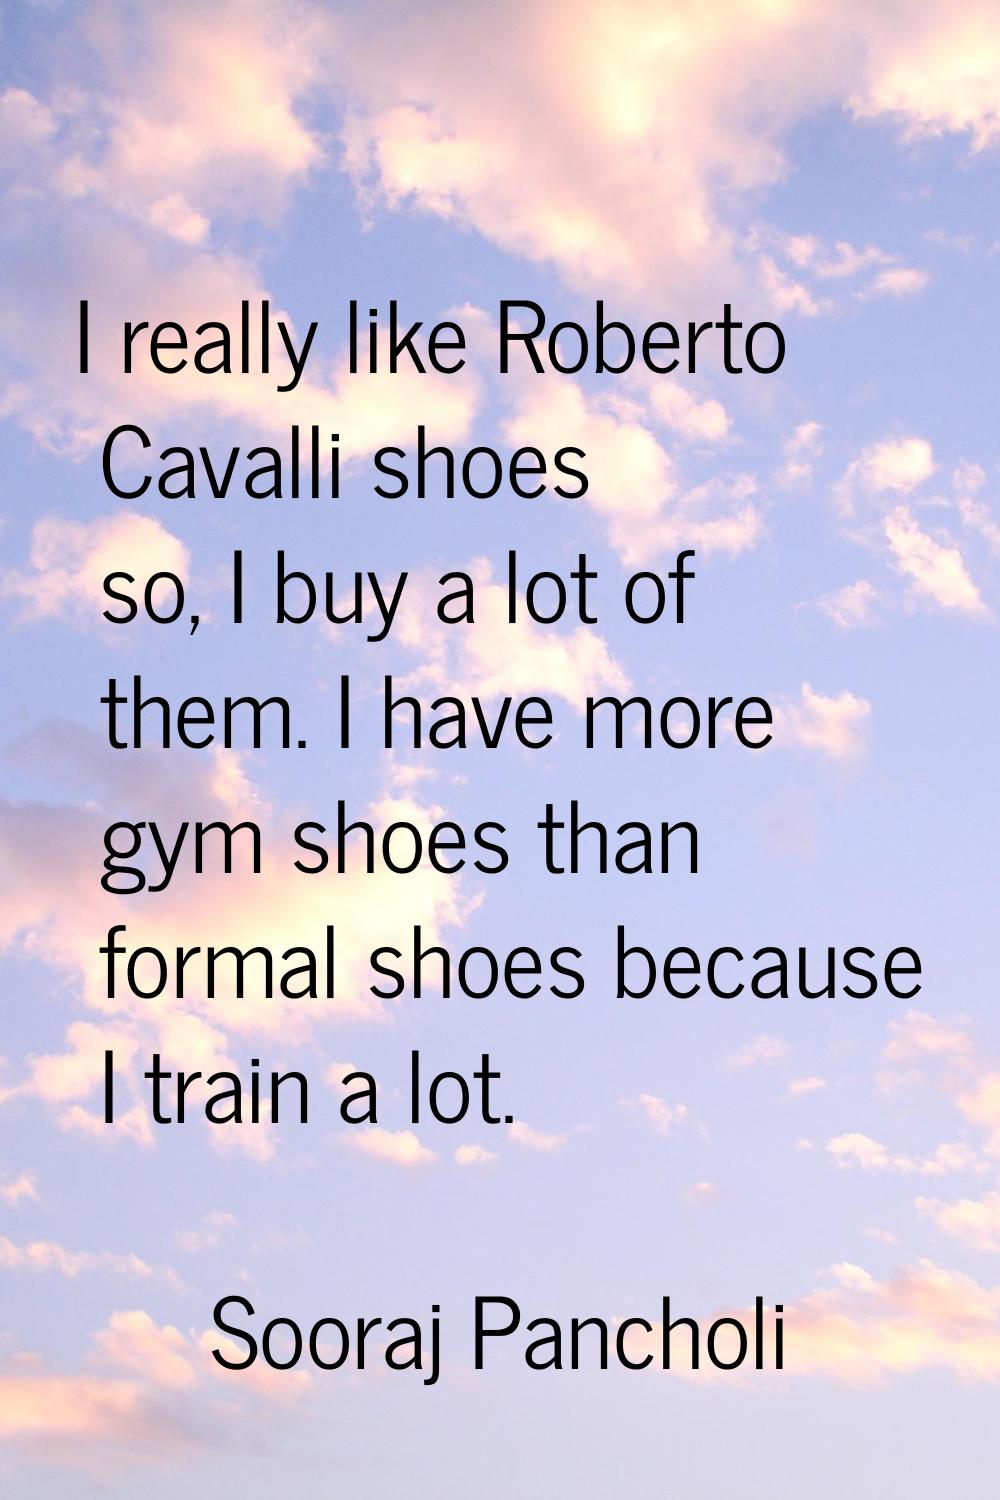 I really like Roberto Cavalli shoes so, I buy a lot of them. I have more gym shoes than formal shoe